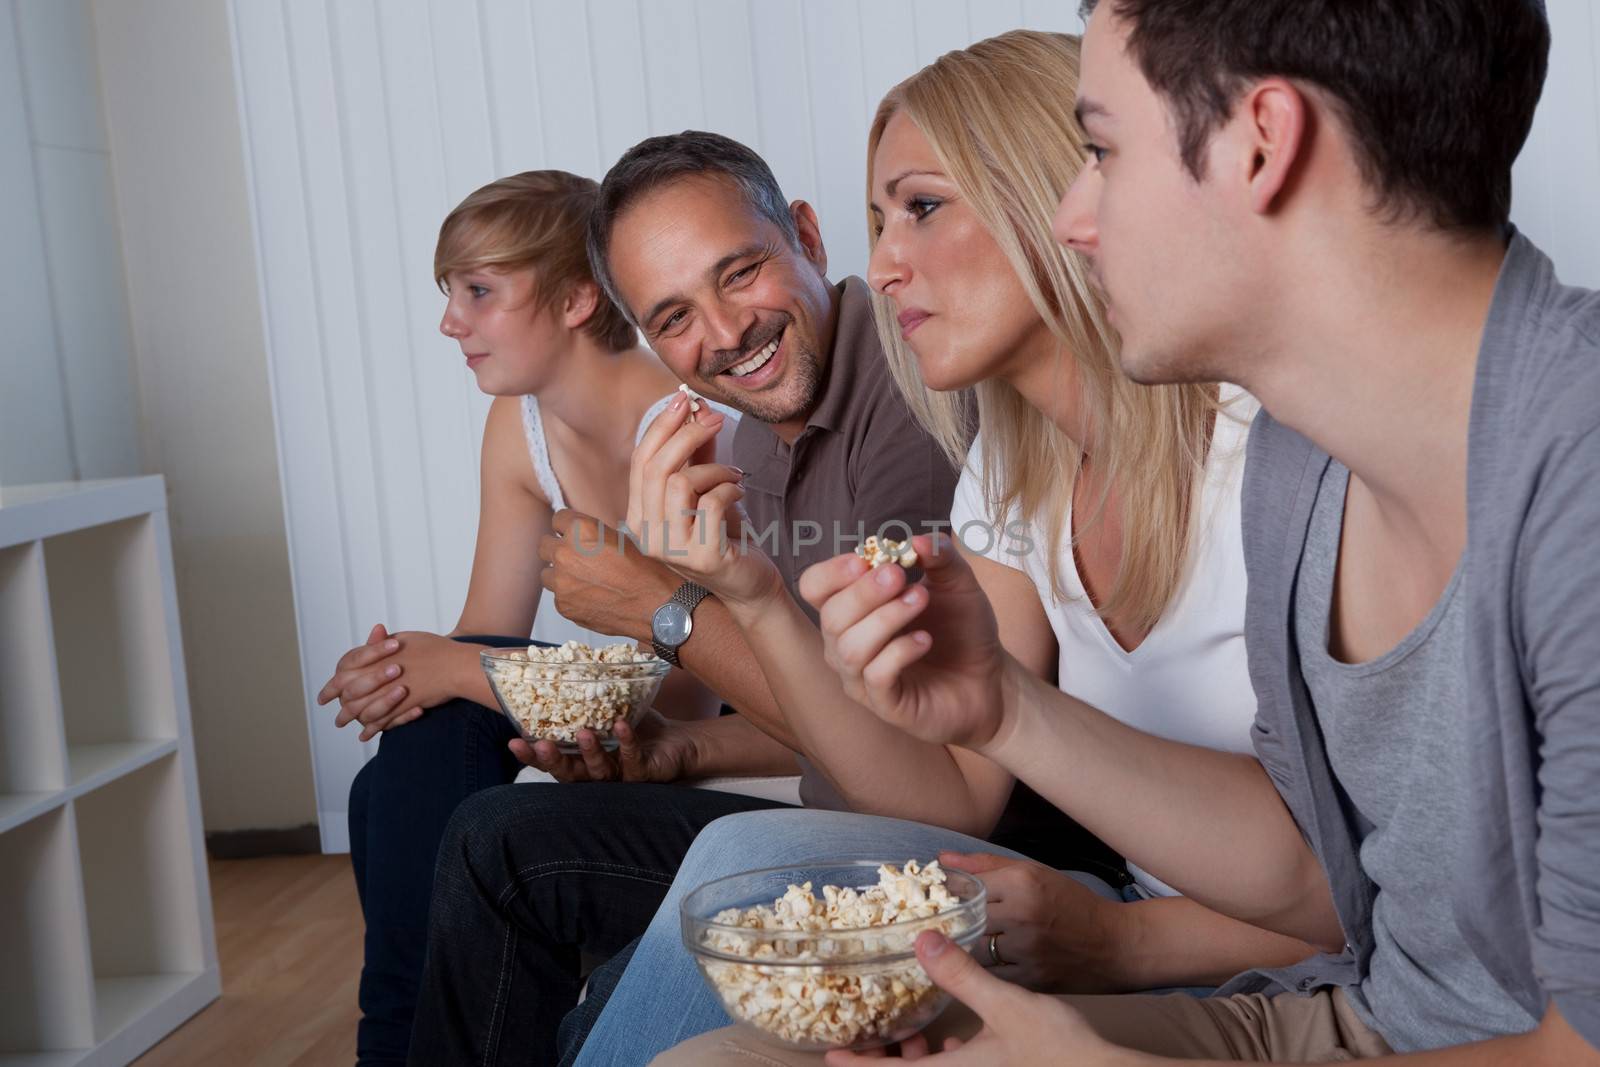 Family with teenage children sitting together on a couch eating popcorn and watching the television